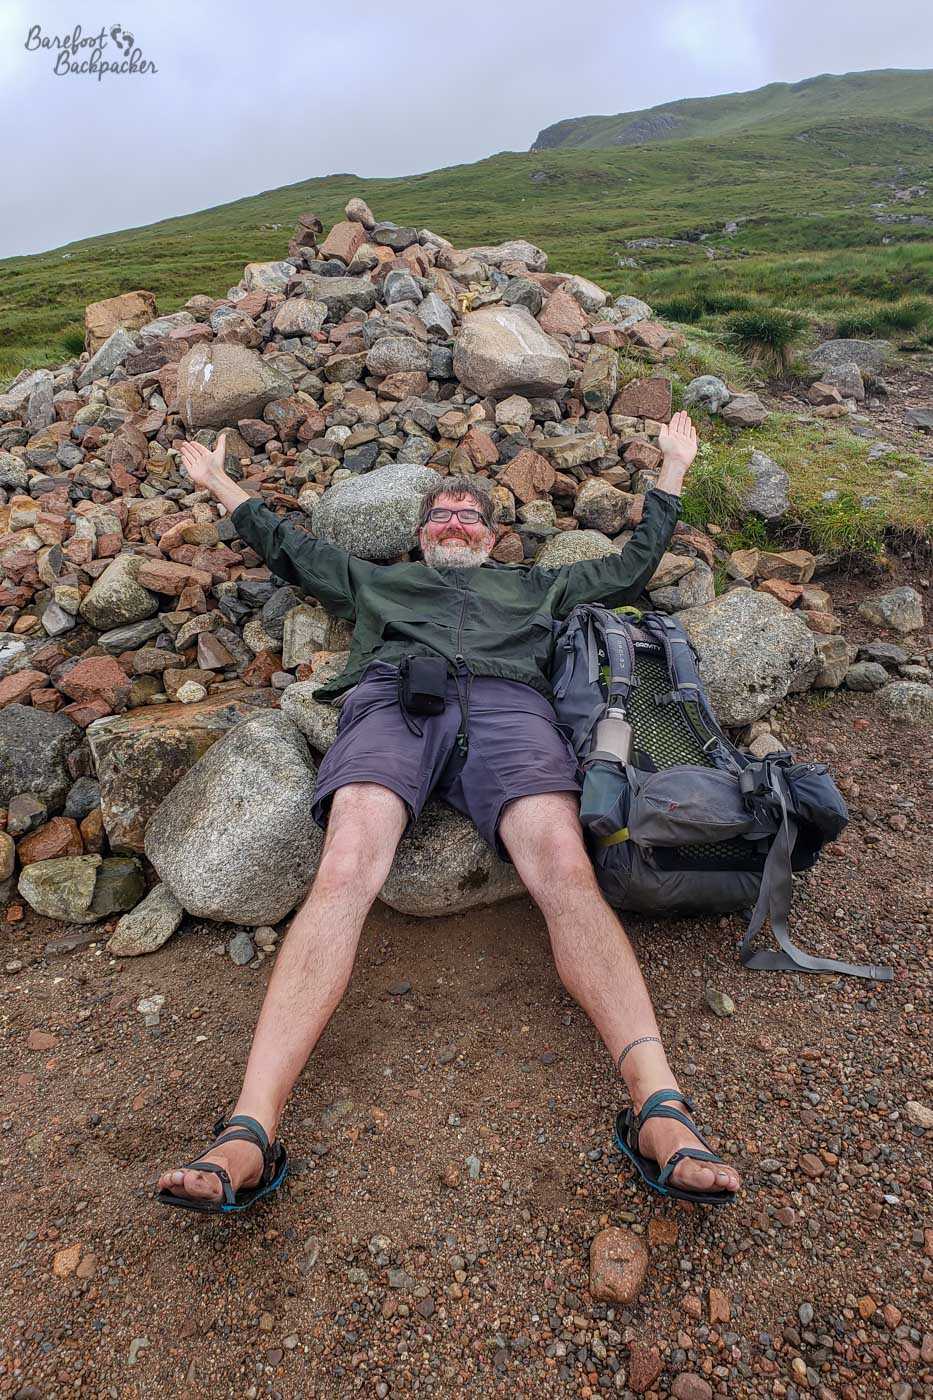 The Barefoot Backpacker is not barefoot. They are wearing minimalist sandals. Ir's at the top of the Devil's Staircase and they are collapsed on a pile of stones, backpack next to them, stretched out in the shape of an X.